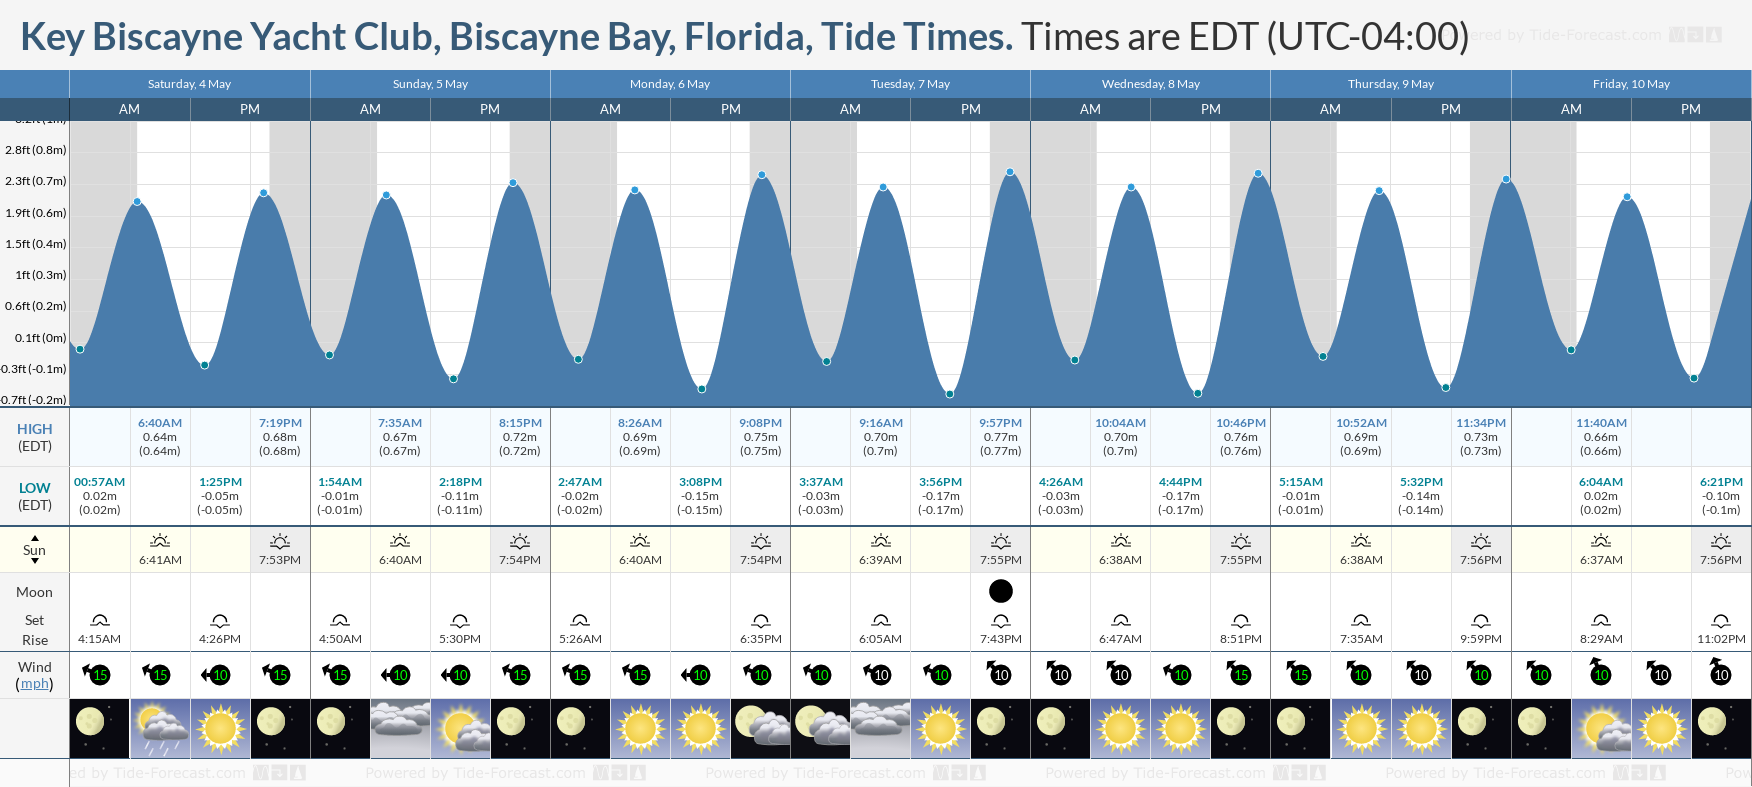 Key Biscayne Yacht Club, Biscayne Bay, Florida Tide Chart including high and low tide tide times for the next 7 days